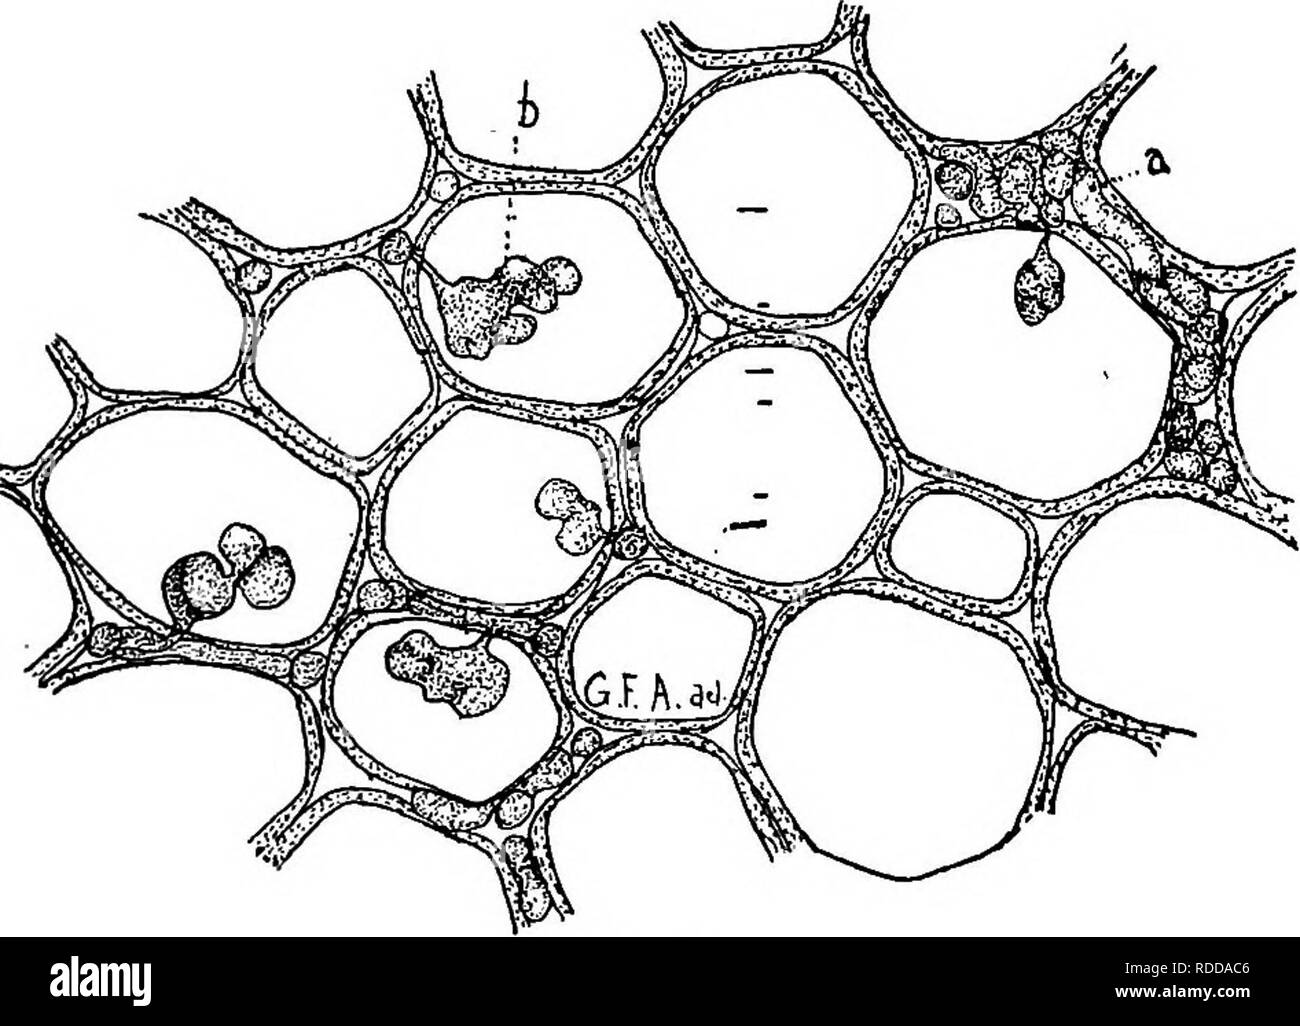 . Lessons in botany. Botany. HOW PLANTS OBTAIN FOOD. 89 ing nutriment maybe demonstrated by making sections through both parasite and host at a point where the haustoria enter the stem. These should then be mounted for examination with the microscope. Fig. 64. Several teleutospores, showing the variations in form. 161. Carnivorous plants, or insectivorous plants.—Examples of these are the well-known Venus fly-trap (Dionaea muscipula) and the sundew (Drosera rotundifolia). These are illustrated in figures 67 and 68. The lamina of the leaf of the Venus. Fig. 65. Cells from the stem of a rusted c Stock Photo